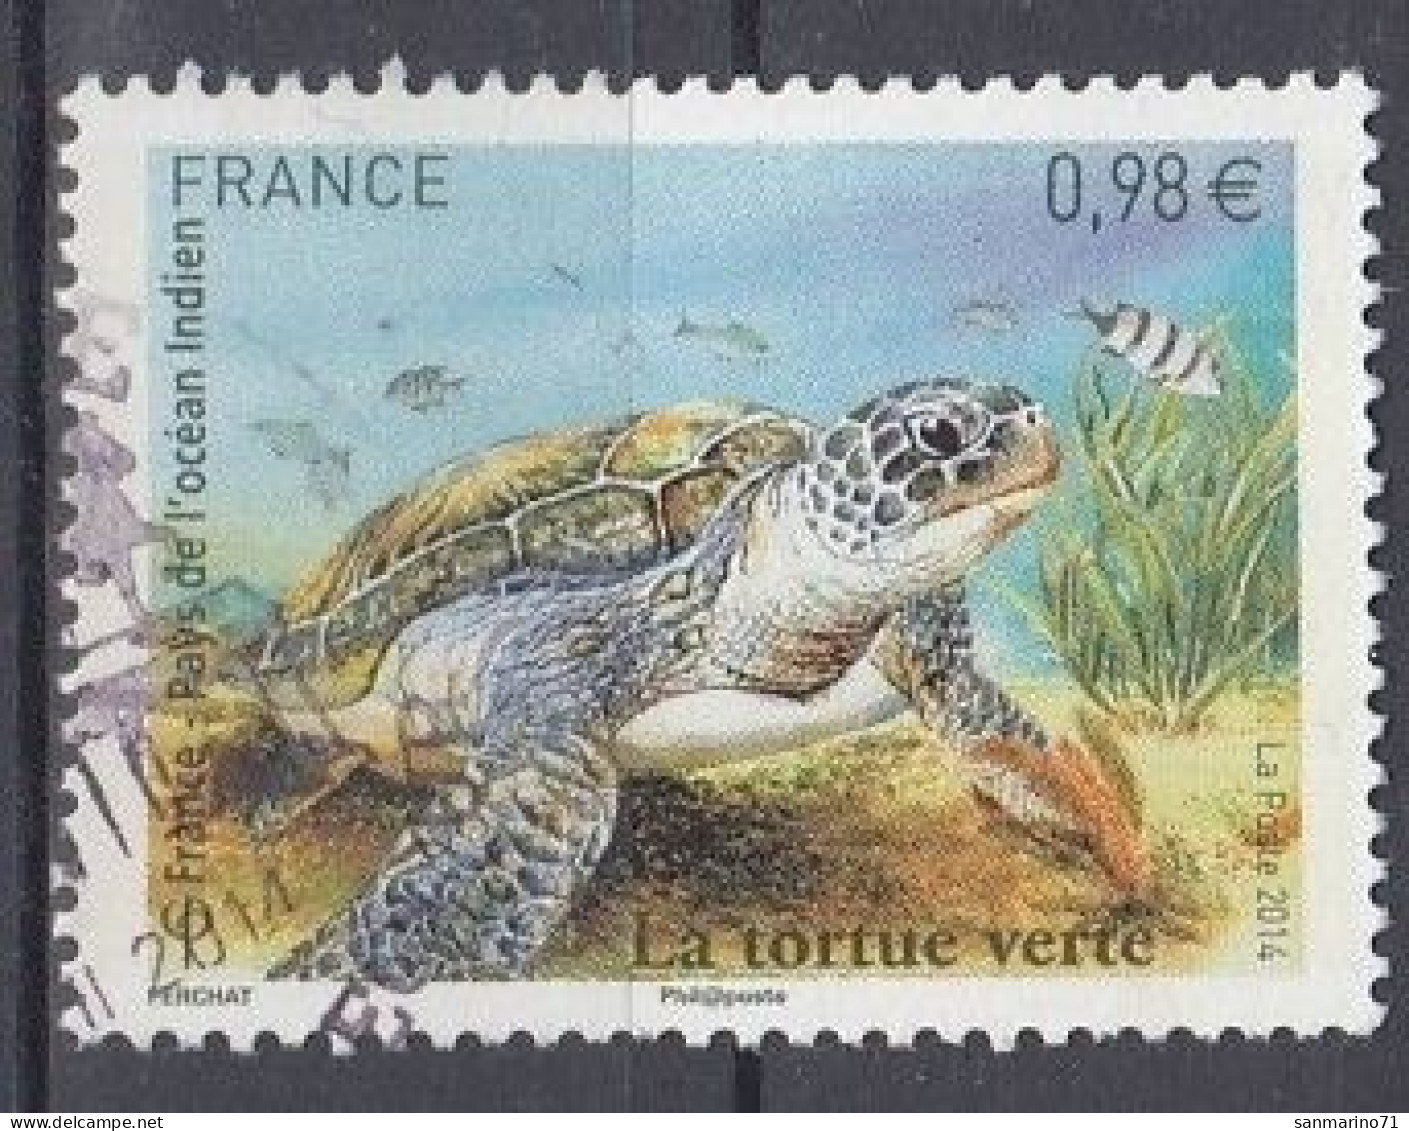 FRANCE 5996,used,falc Hinged - Tortugas